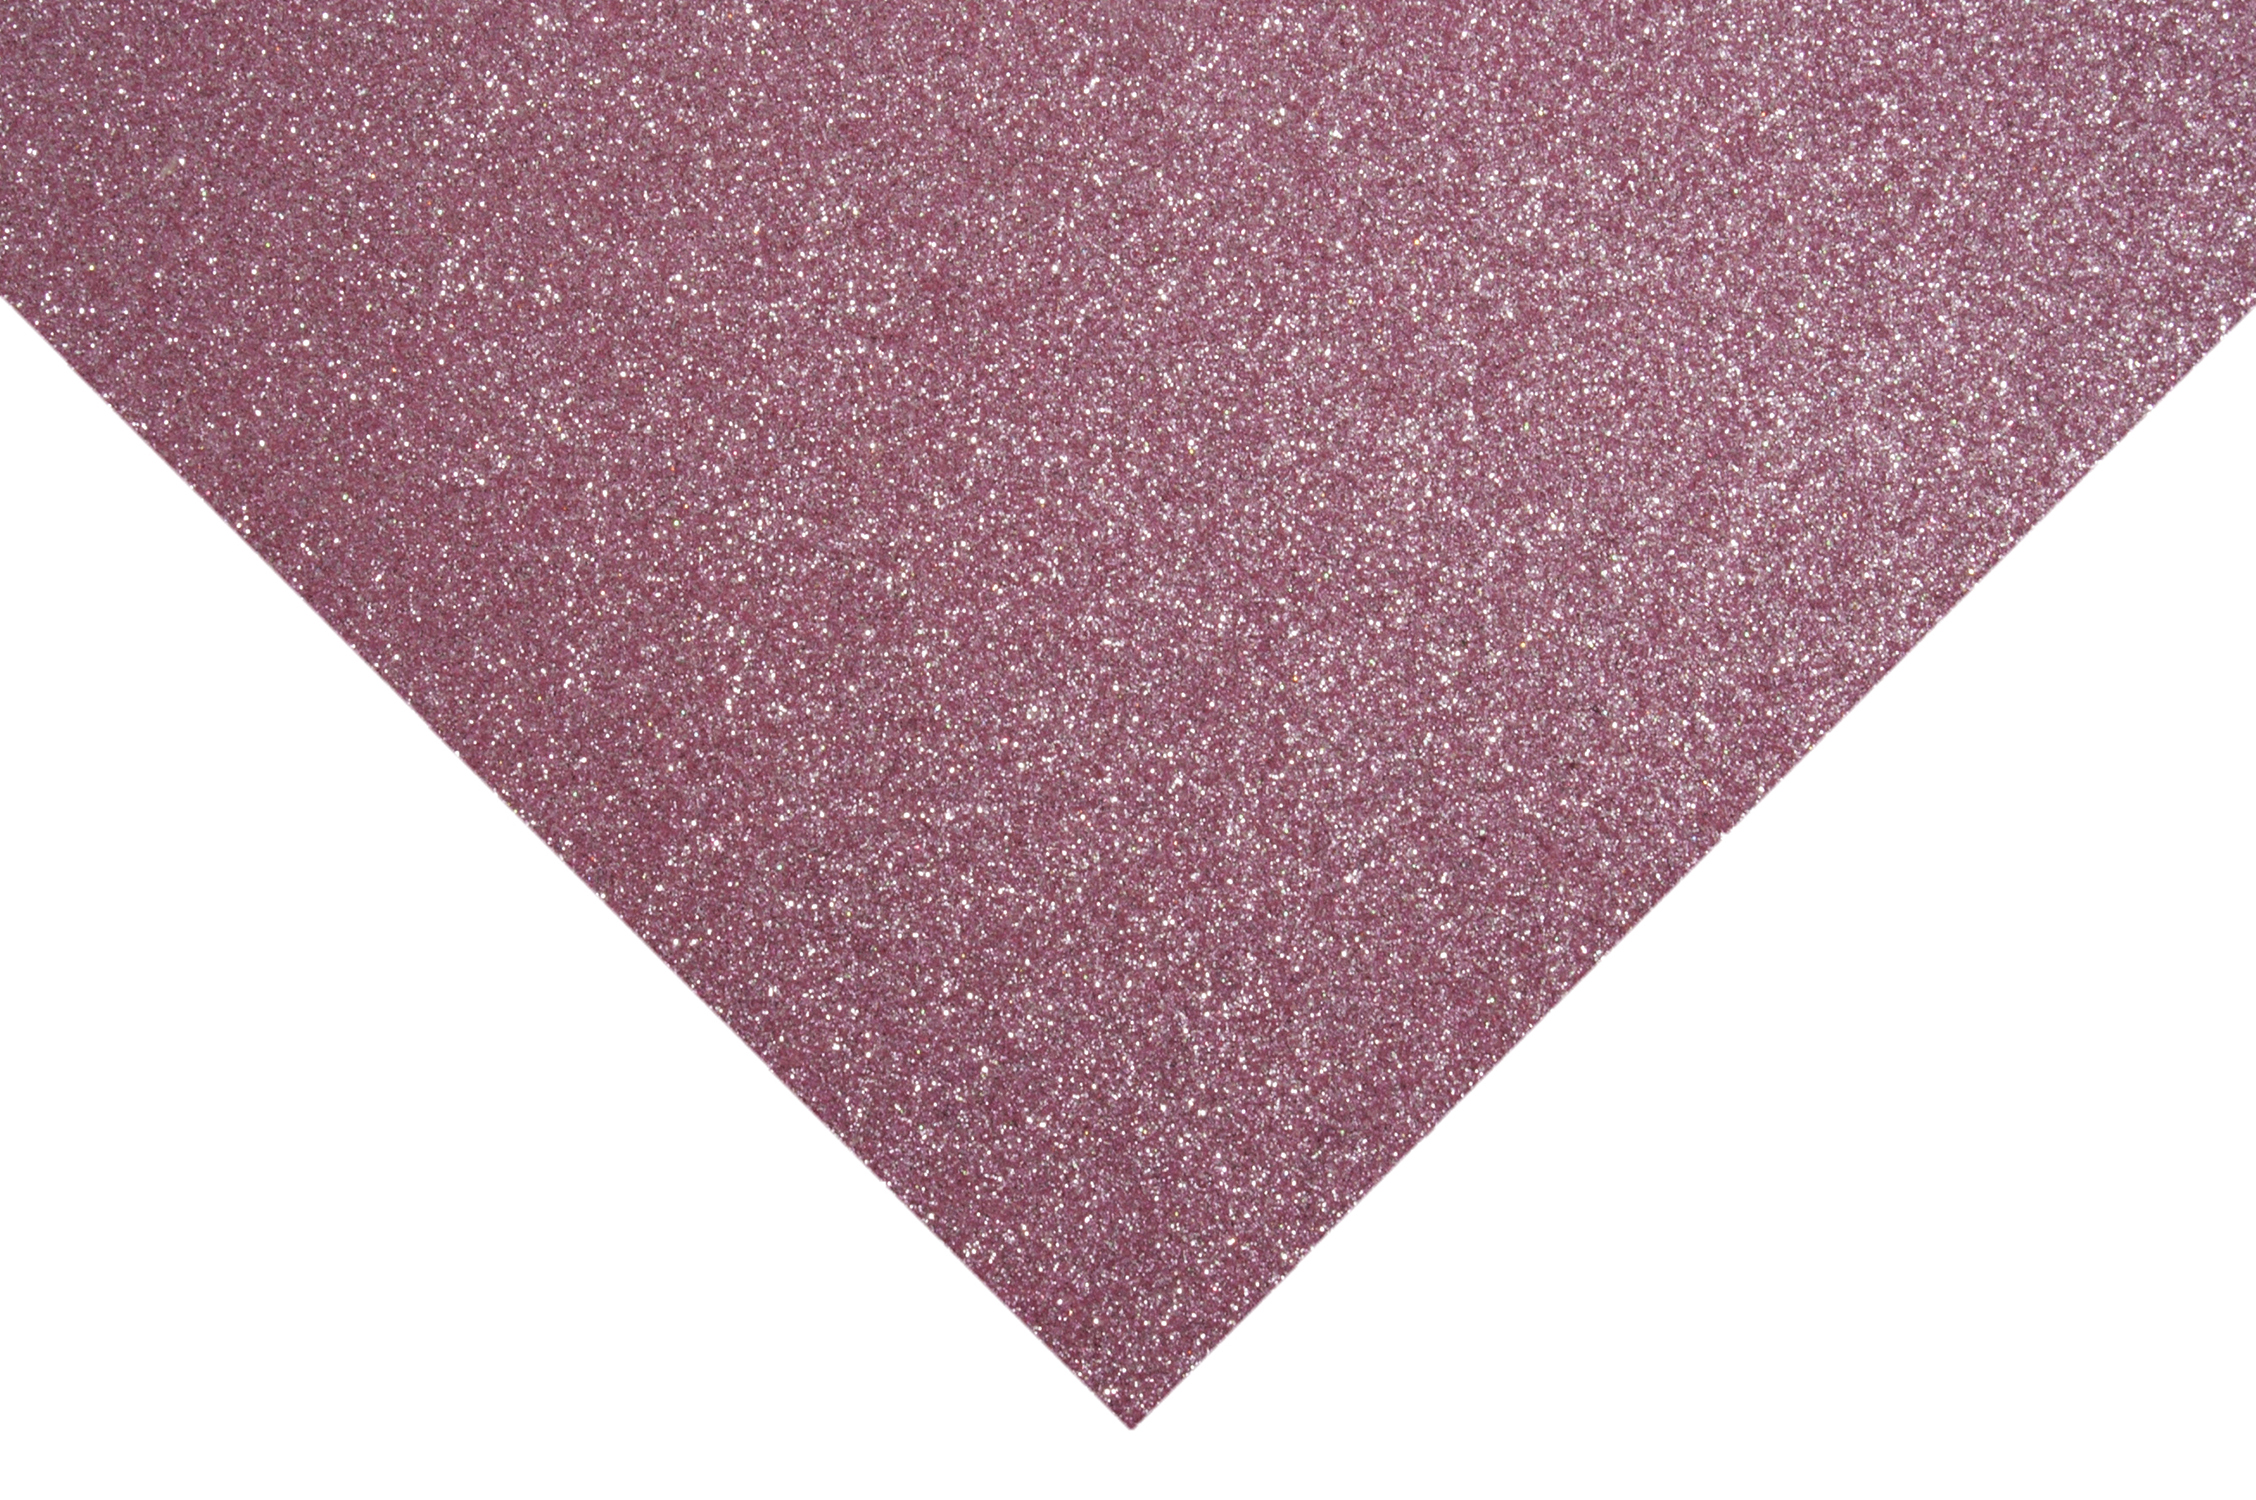 Colored Glitter Paper, 30 Sheets 10 Colors, Light Cardstock for